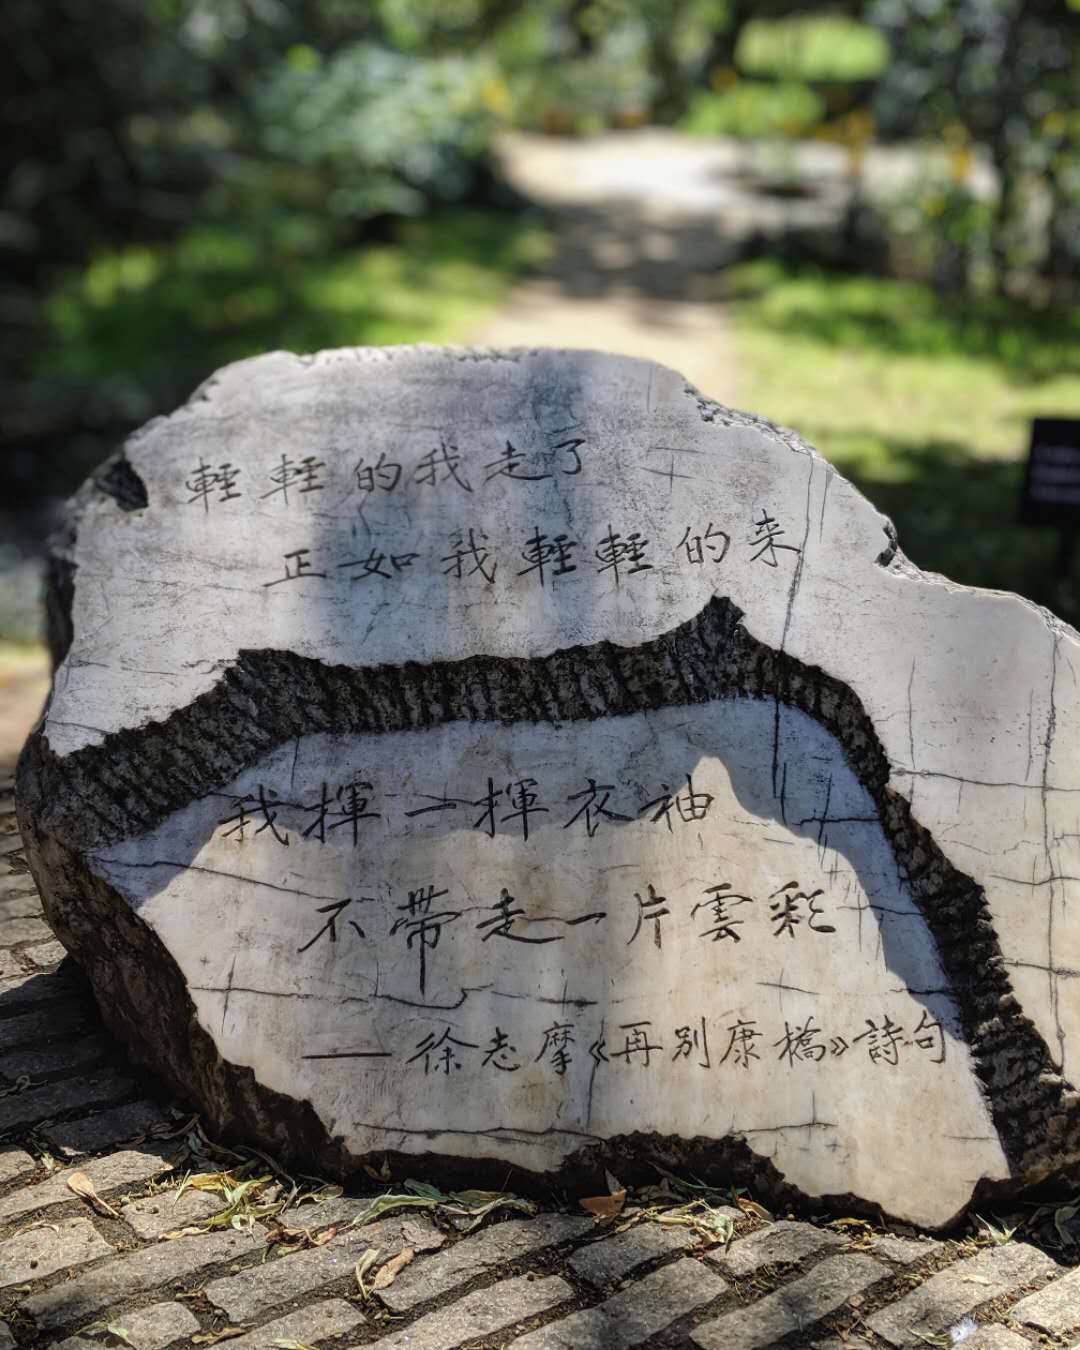 Poem by Xu Zhimo at Cambridge